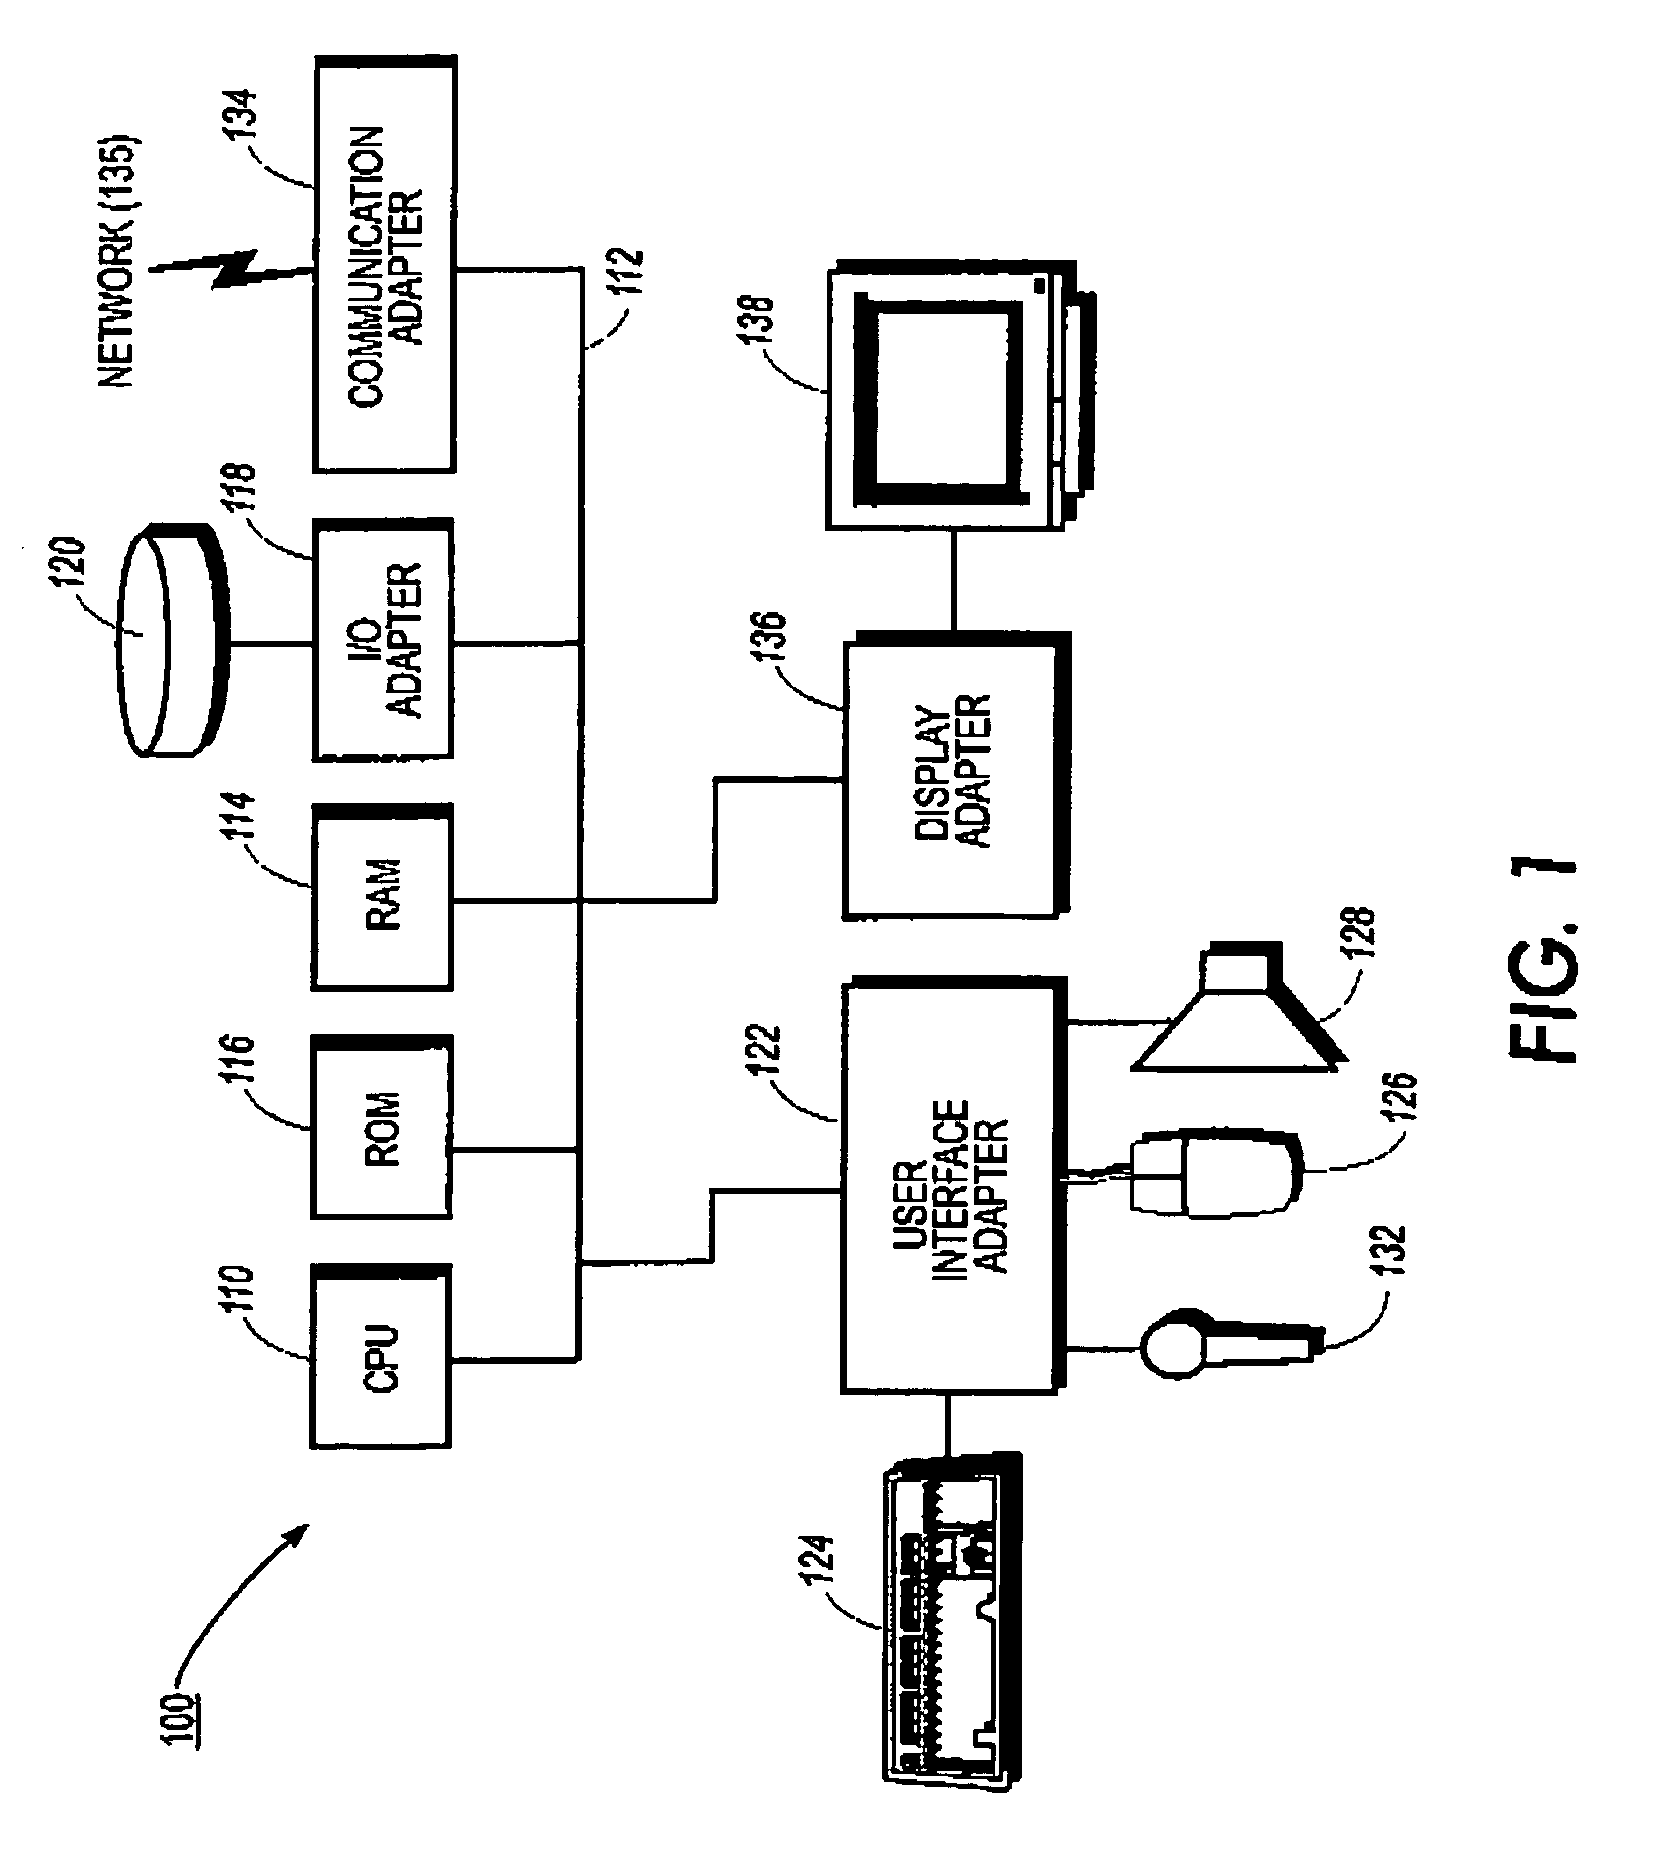 System, method and article of manufacture for knowledge-based password protection of computers and other systems